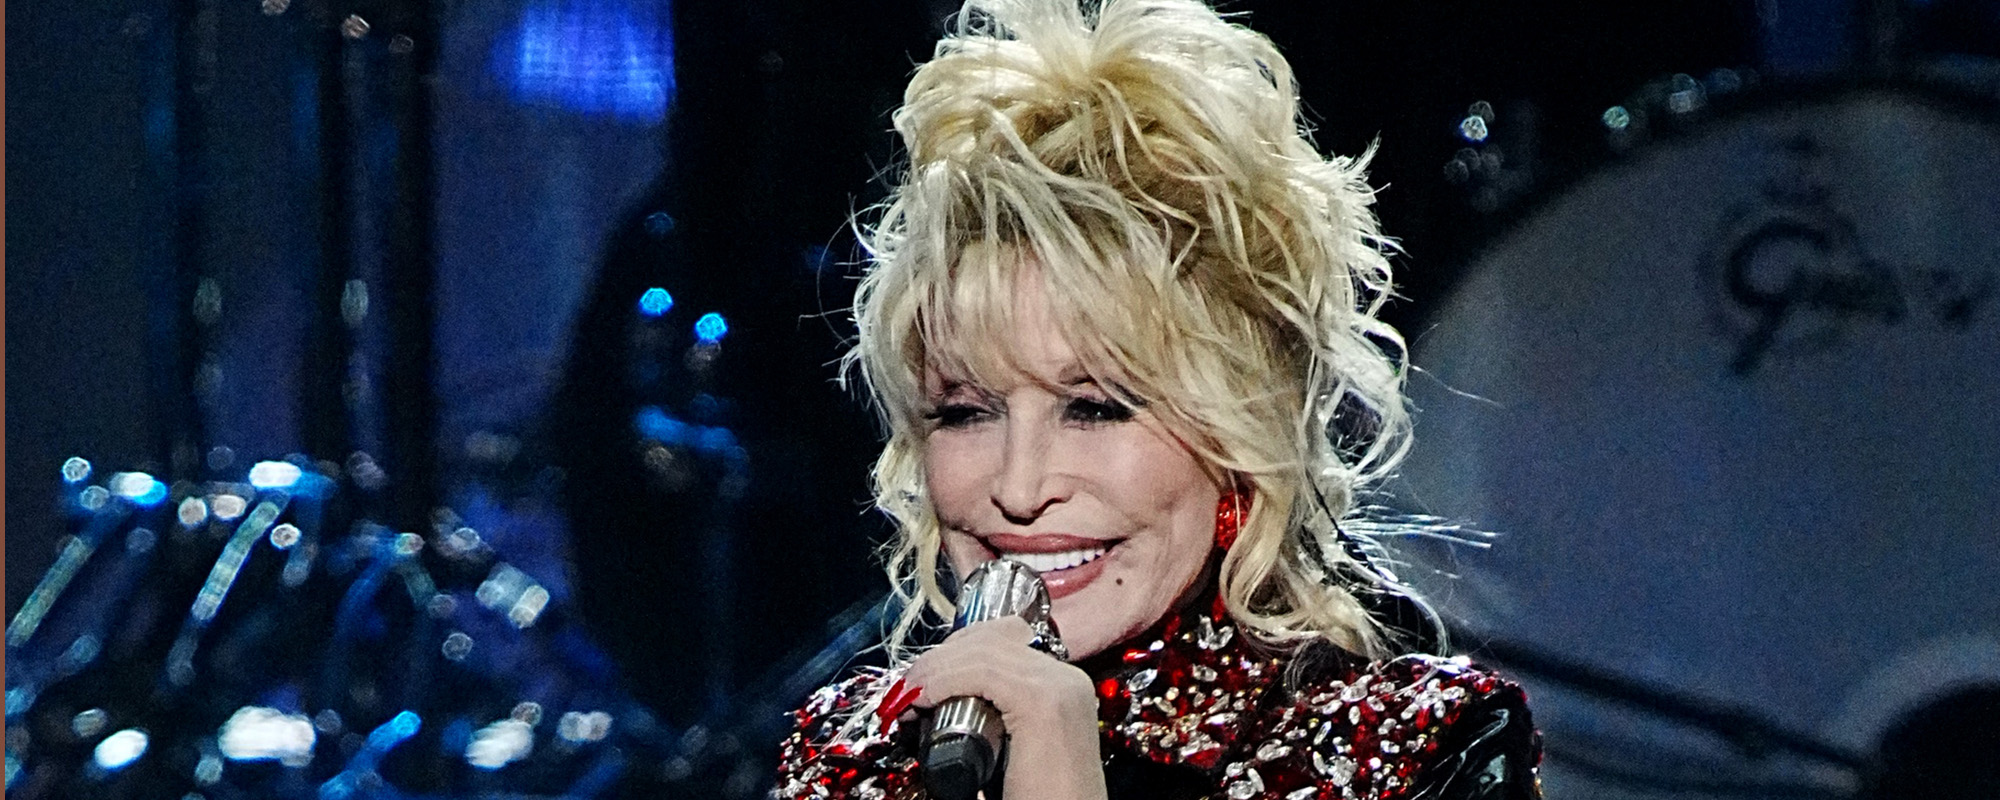 Why Dolly Parton’s “I Will Always Love You” Was Cut from Baz Luhrmann’s ‘Elvis’ Biopic